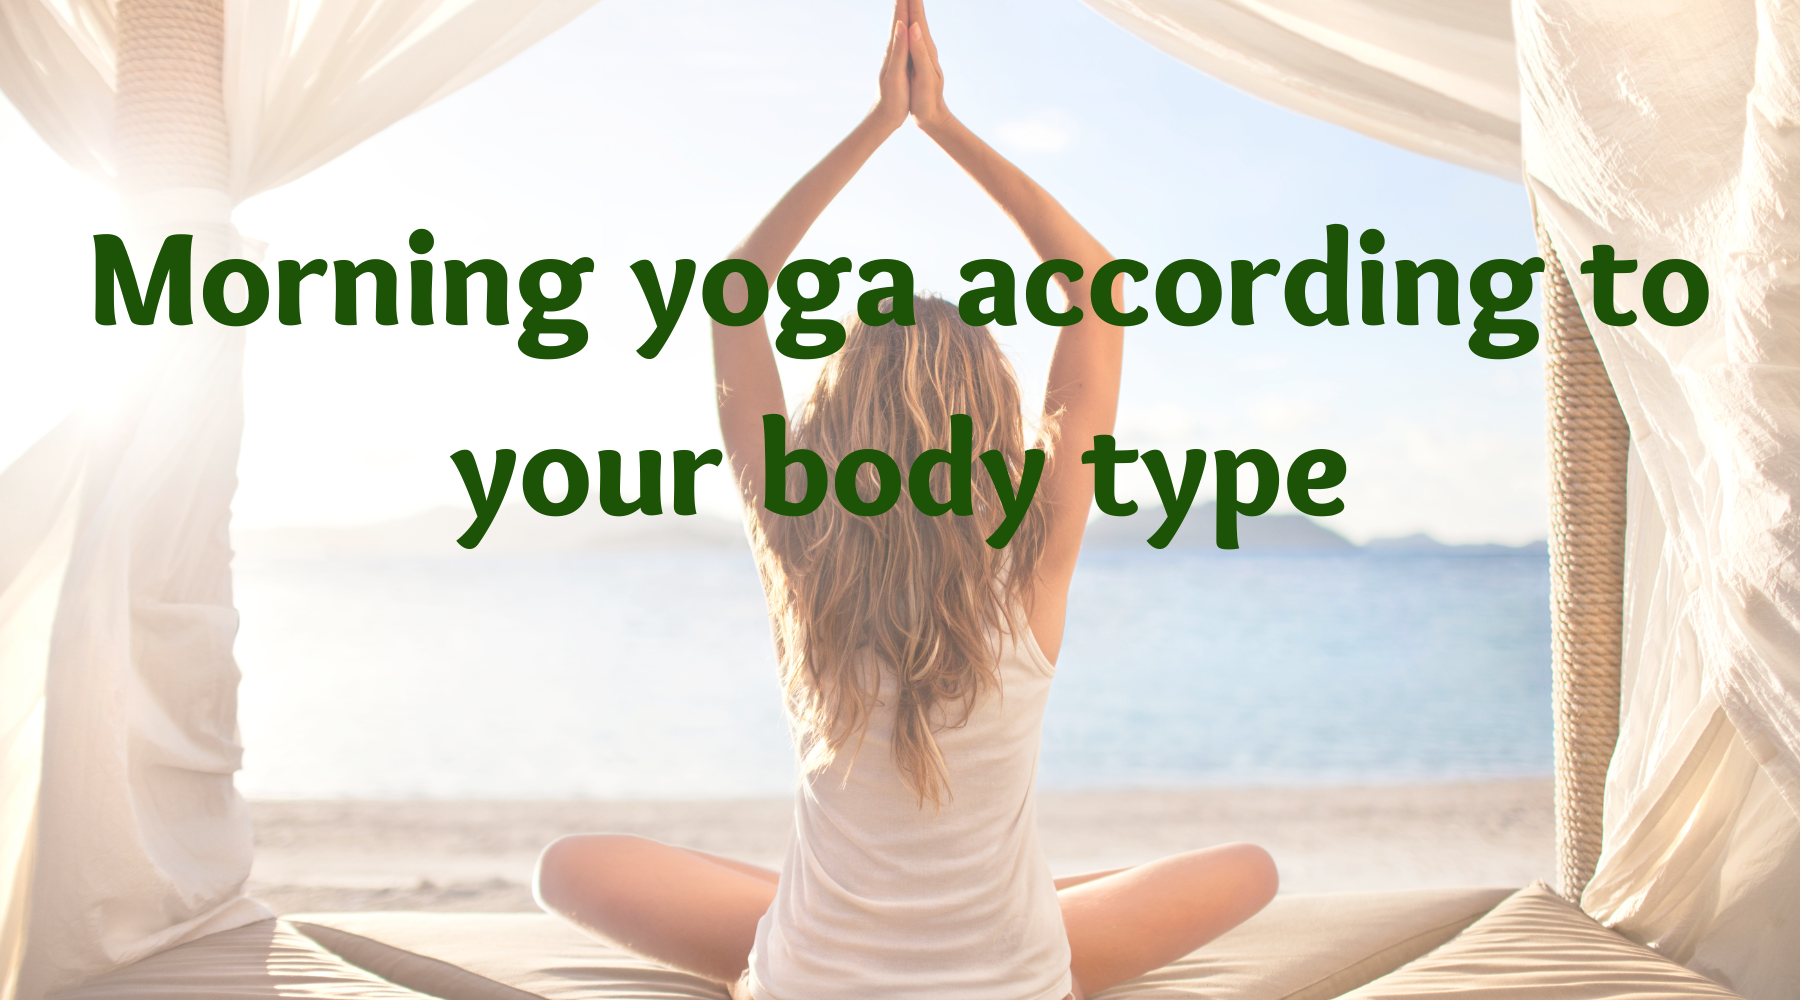 Morning yoga according to your body type